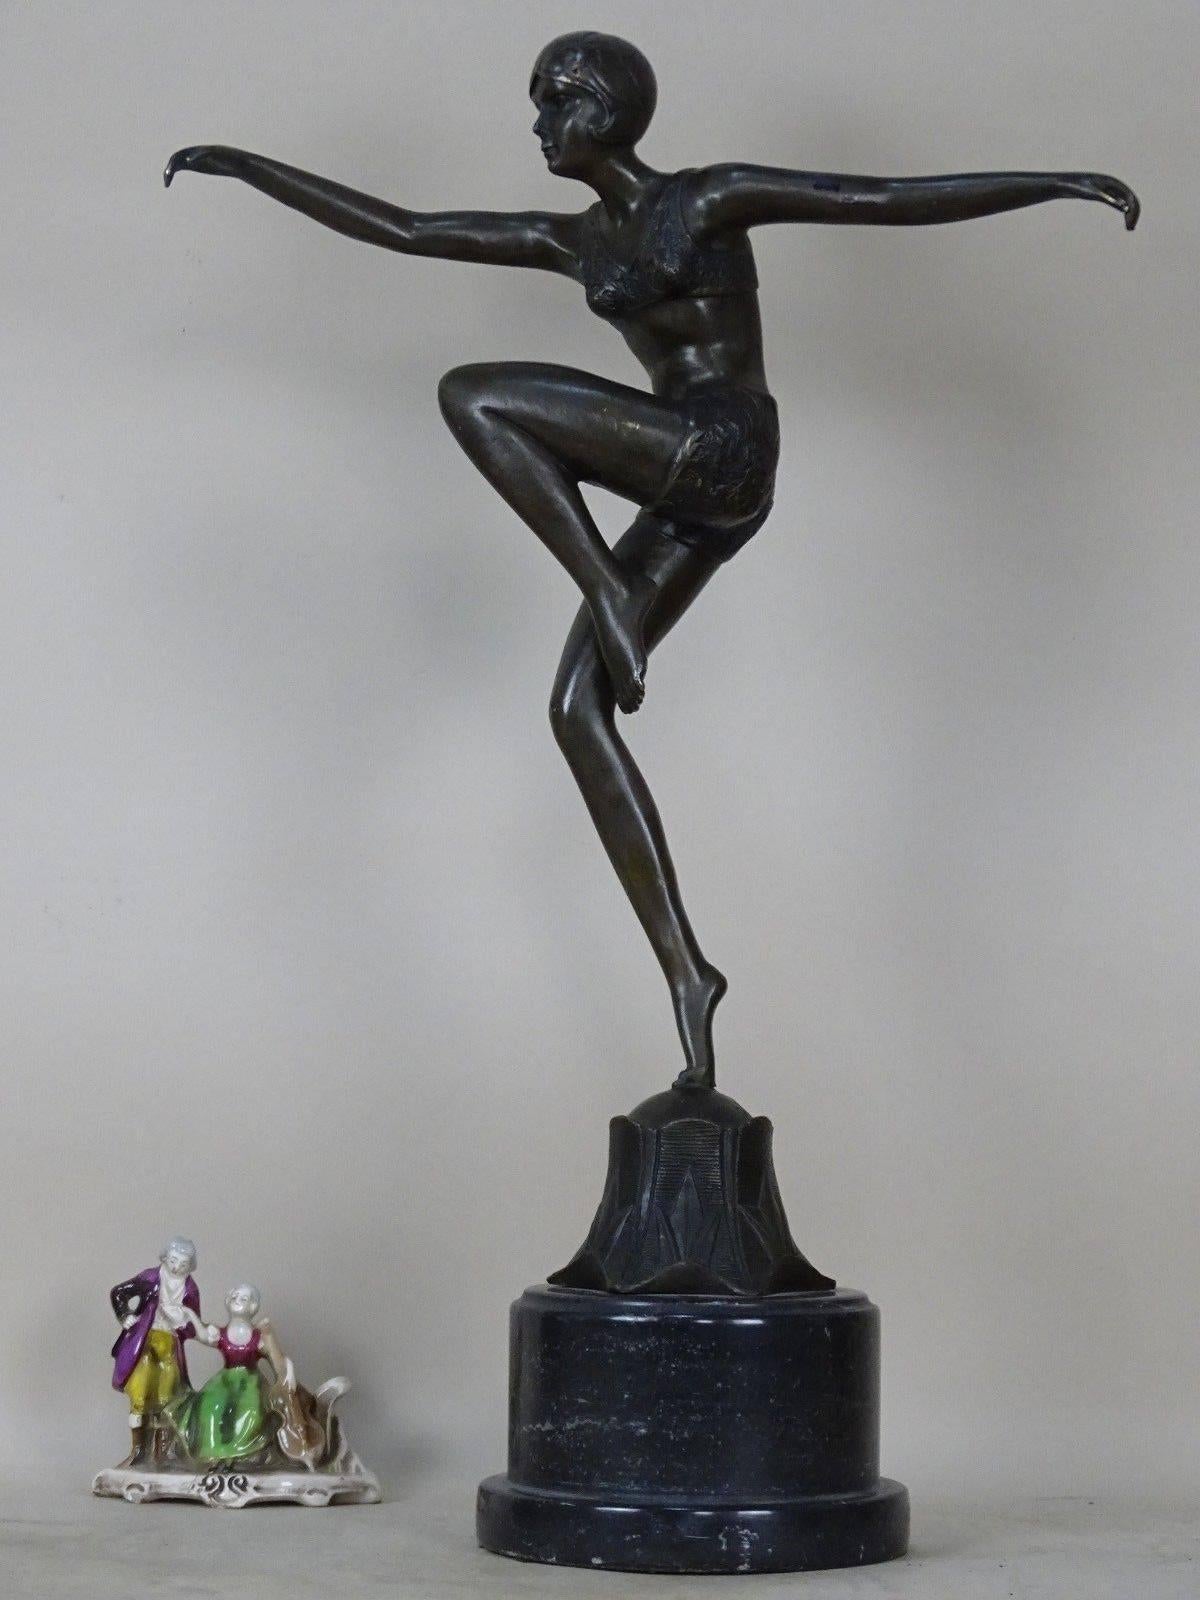 Demétre Haralamb Chiparus (16 September 1886-22 January 1947) was a Romanian Art Deco era sculptor who lived and worked in Paris, France. He was one of the most important sculptors of the Art Deco era.
Complimentary Shipping Worldwide !!!
31x49x15